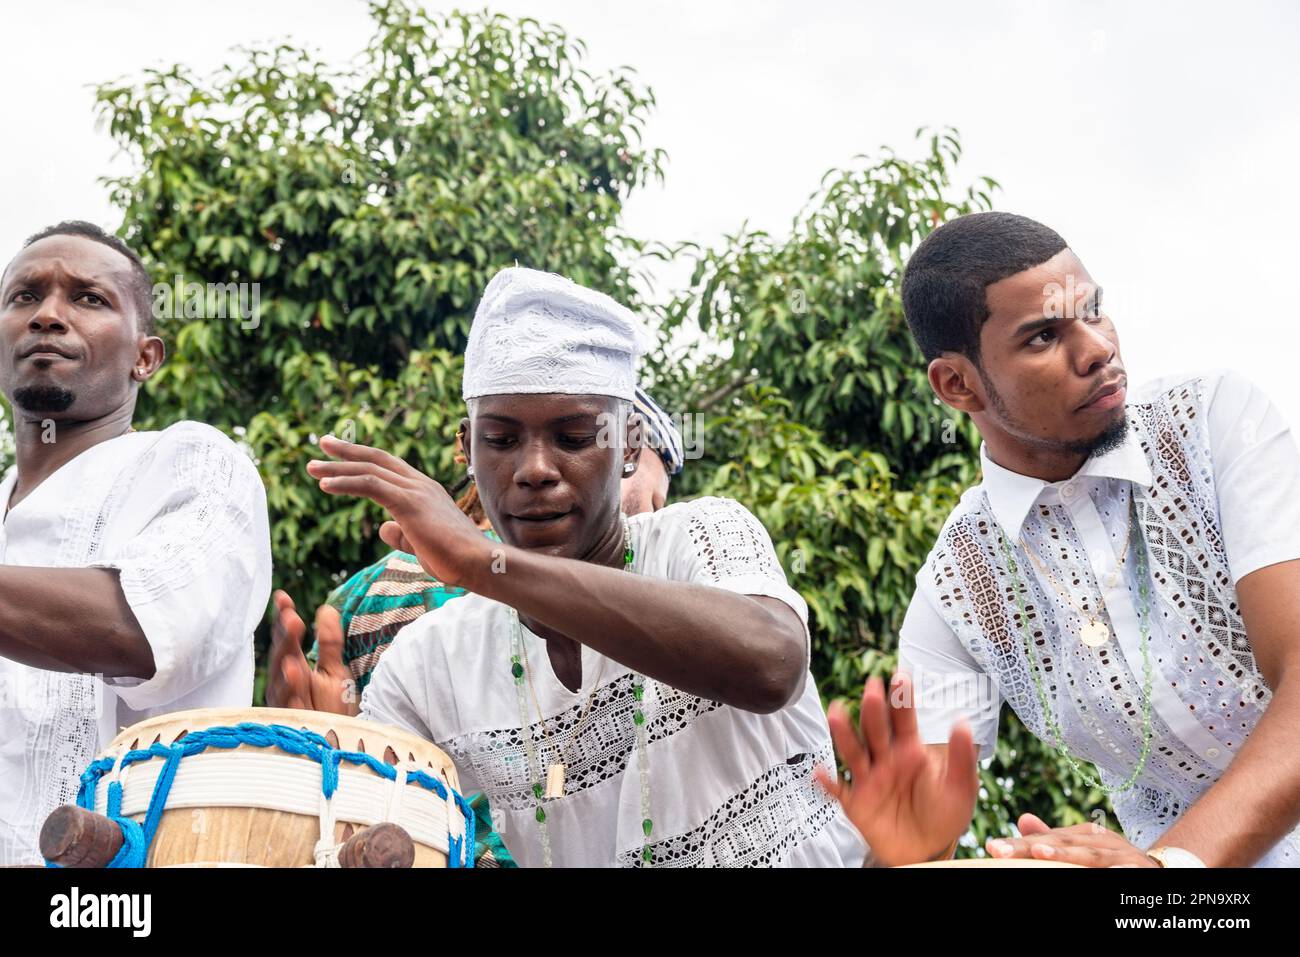 Santo Amaro, Bahia, Brazil - May 15, 2022: Candomble members are seen playing and singing during the Bembe do Mercado religious festivities in Santo A Stock Photo